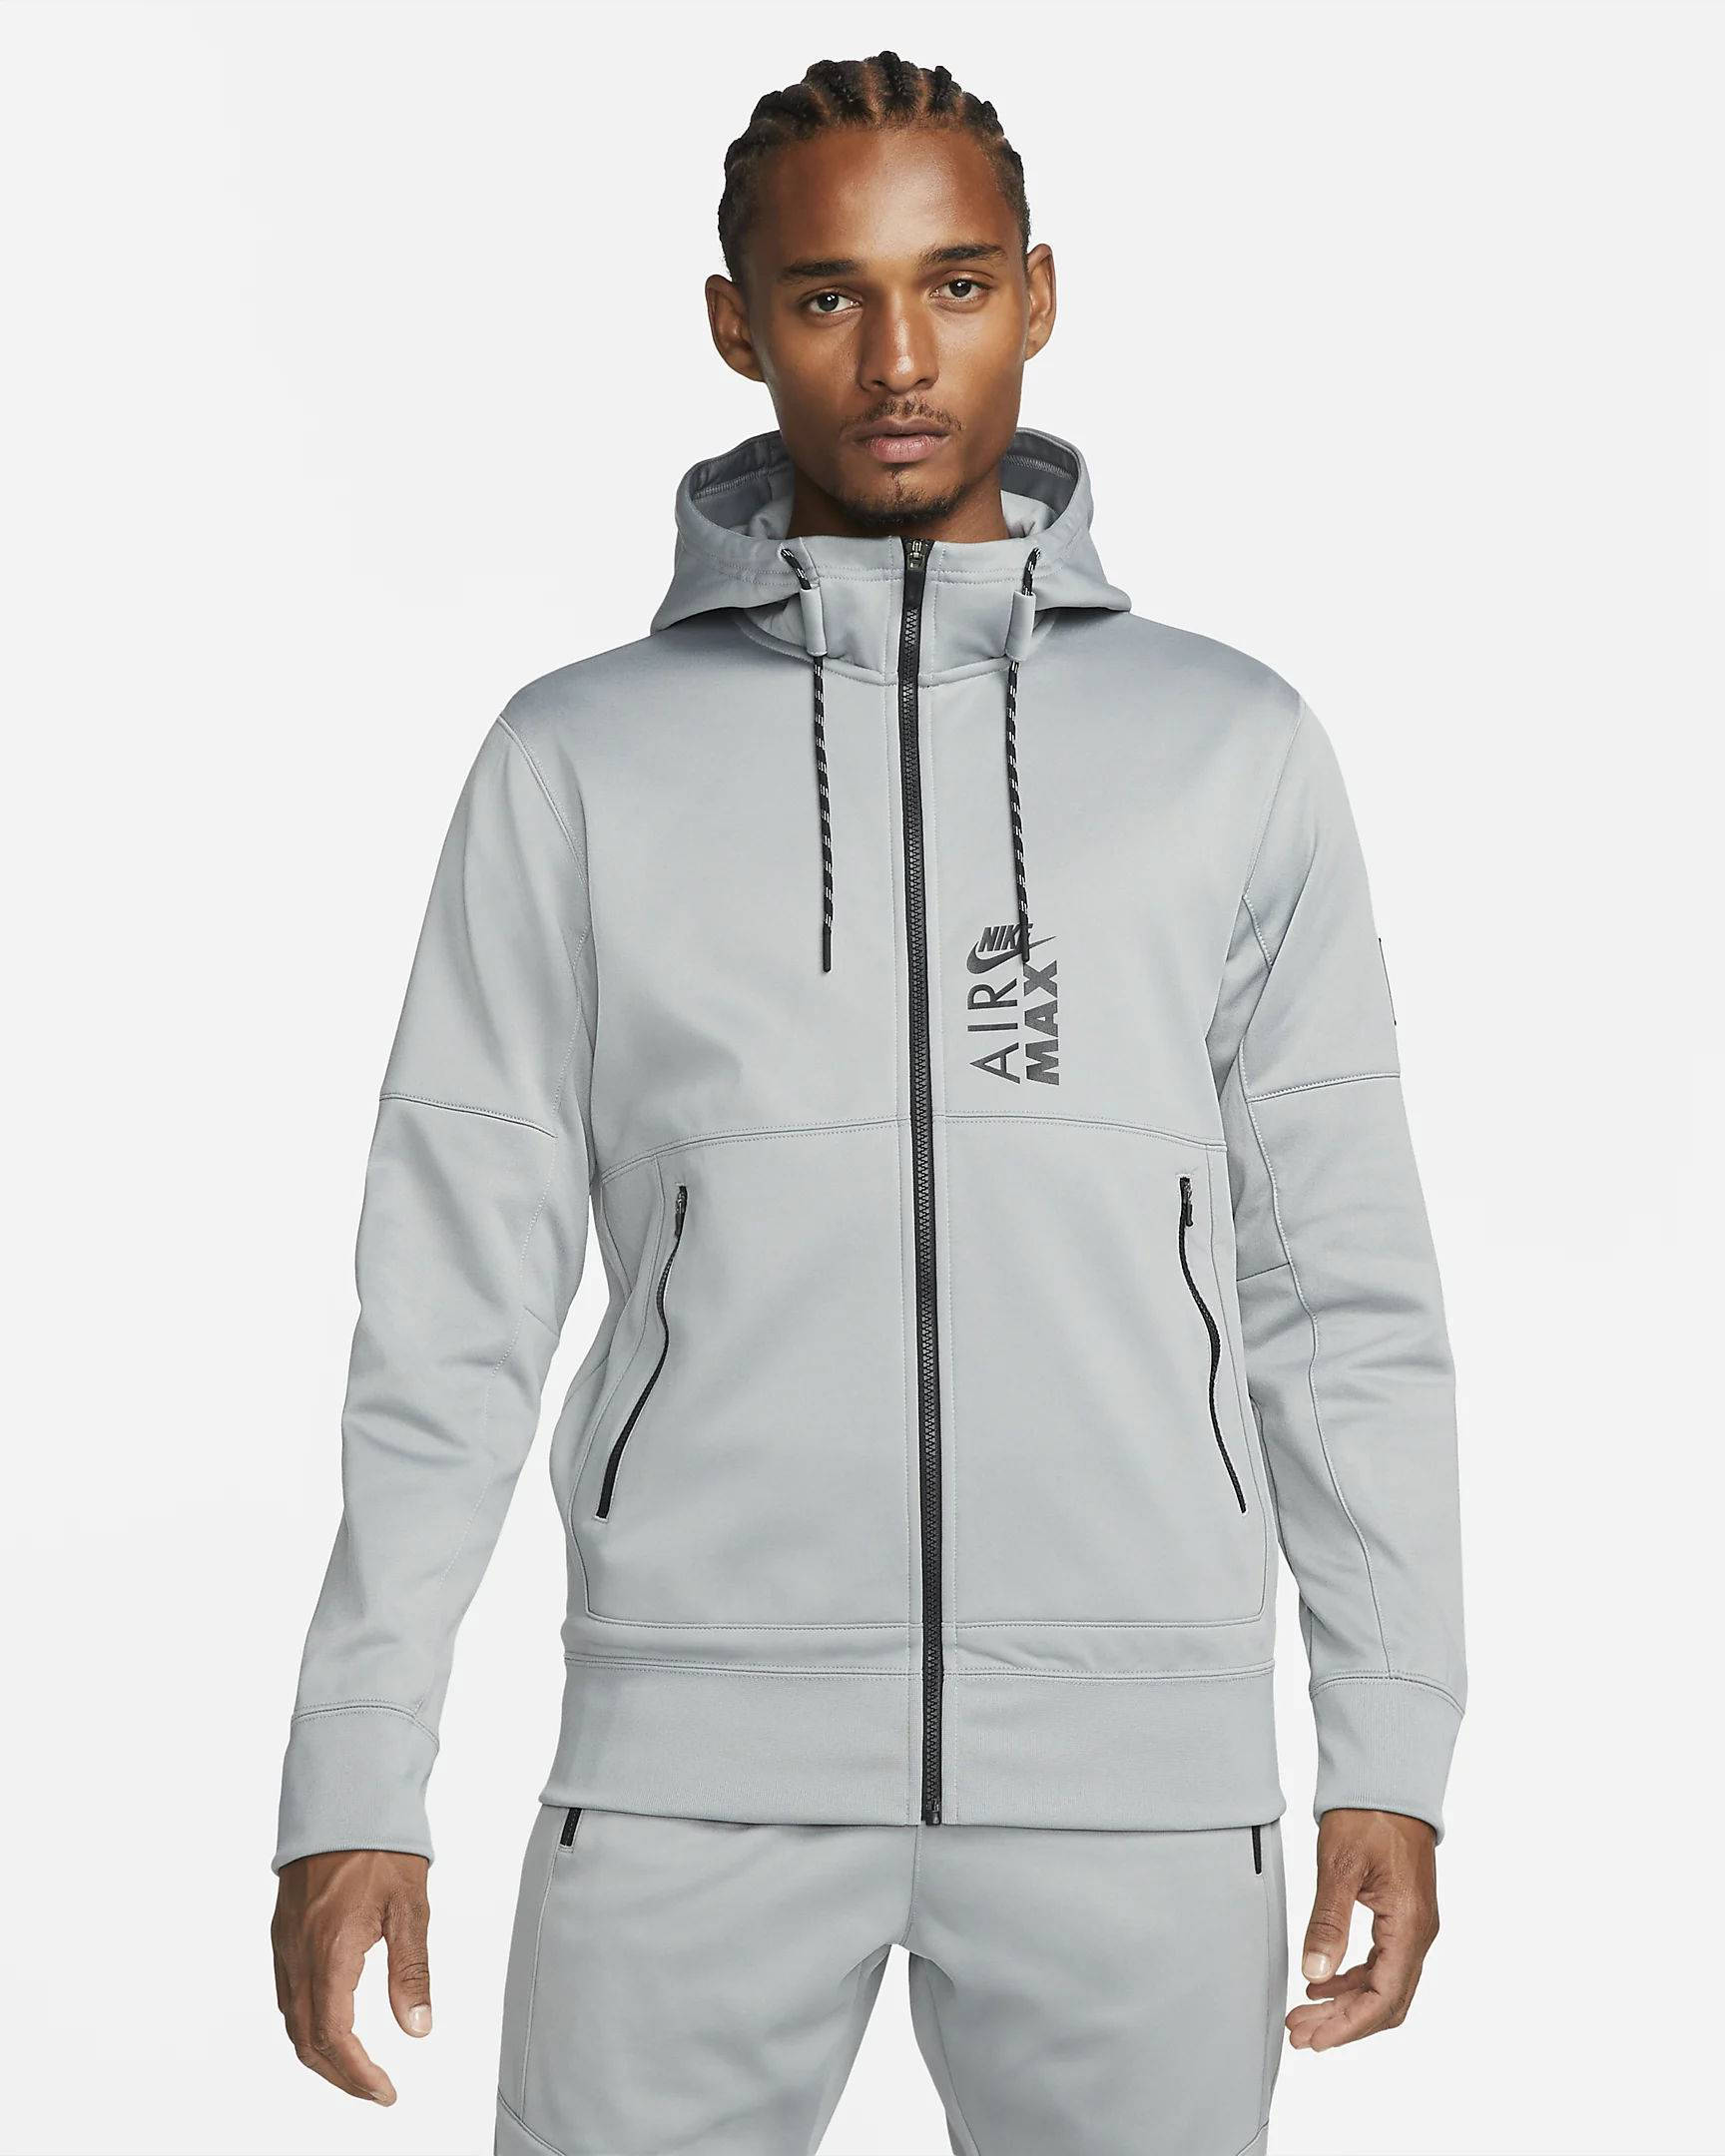 Nike Sportswear Air Max Full-Zip Hoodie - Particle Grey | The Sole Supplier